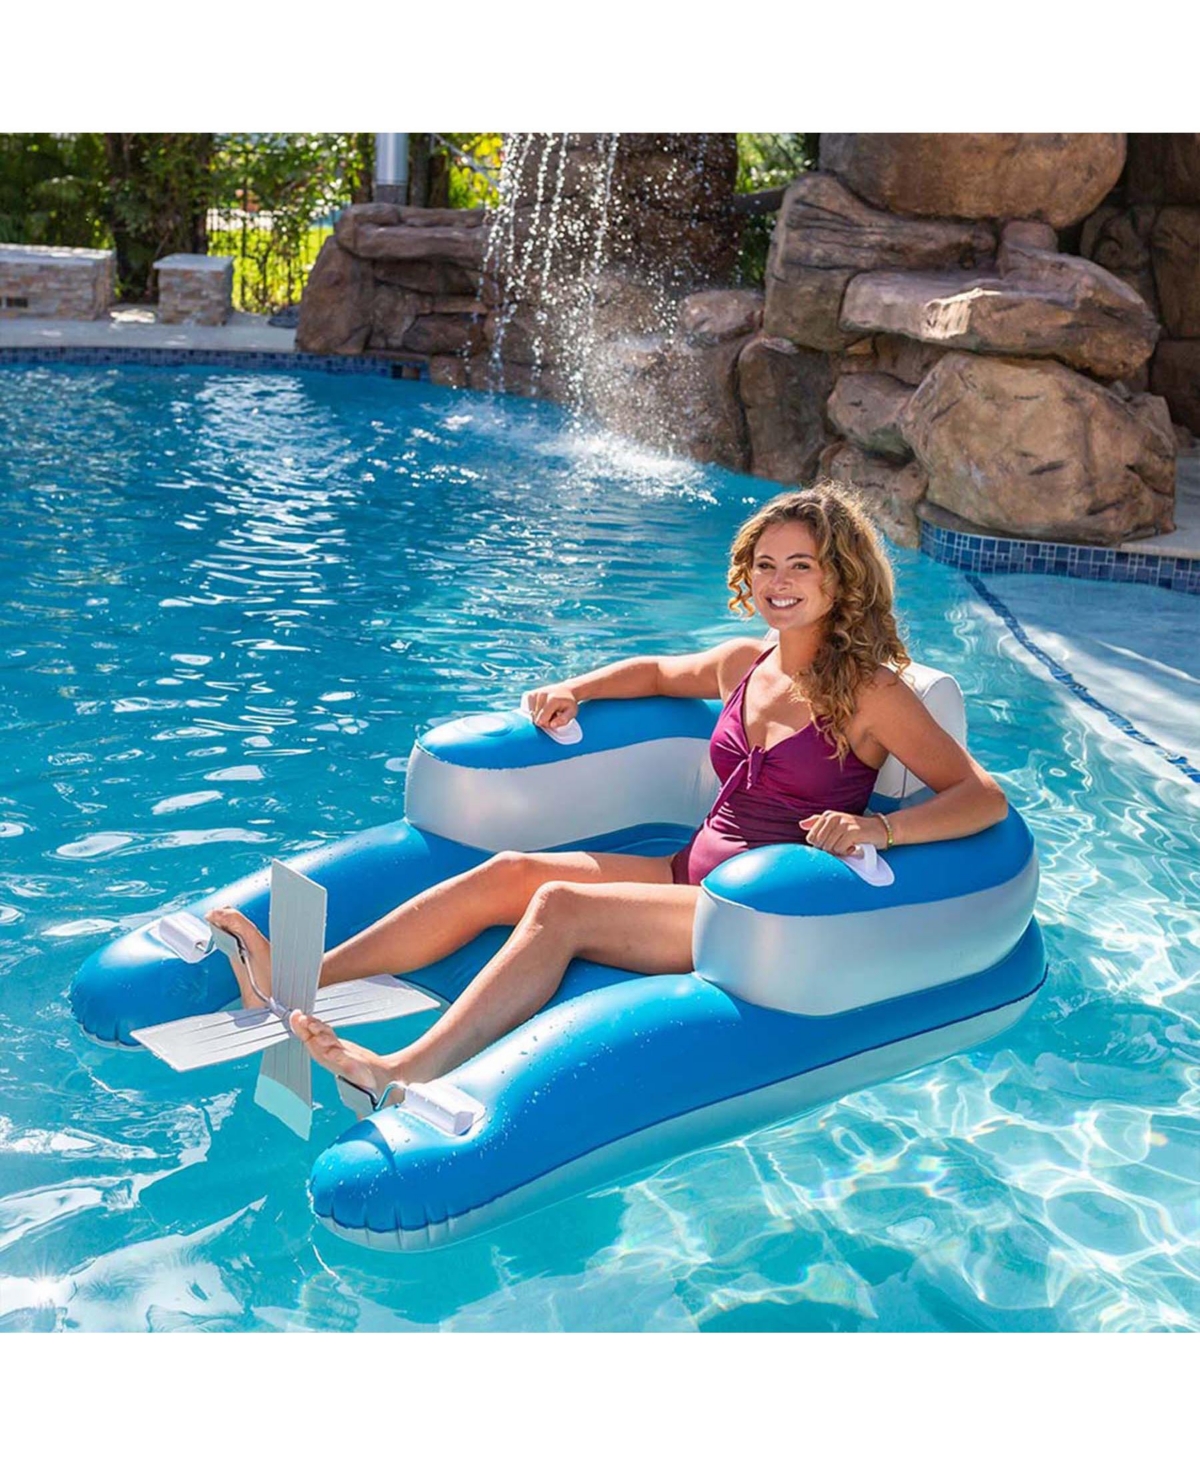 Poolcandy Pedal Runner Deluxe Foot-powered Lounger In Blue